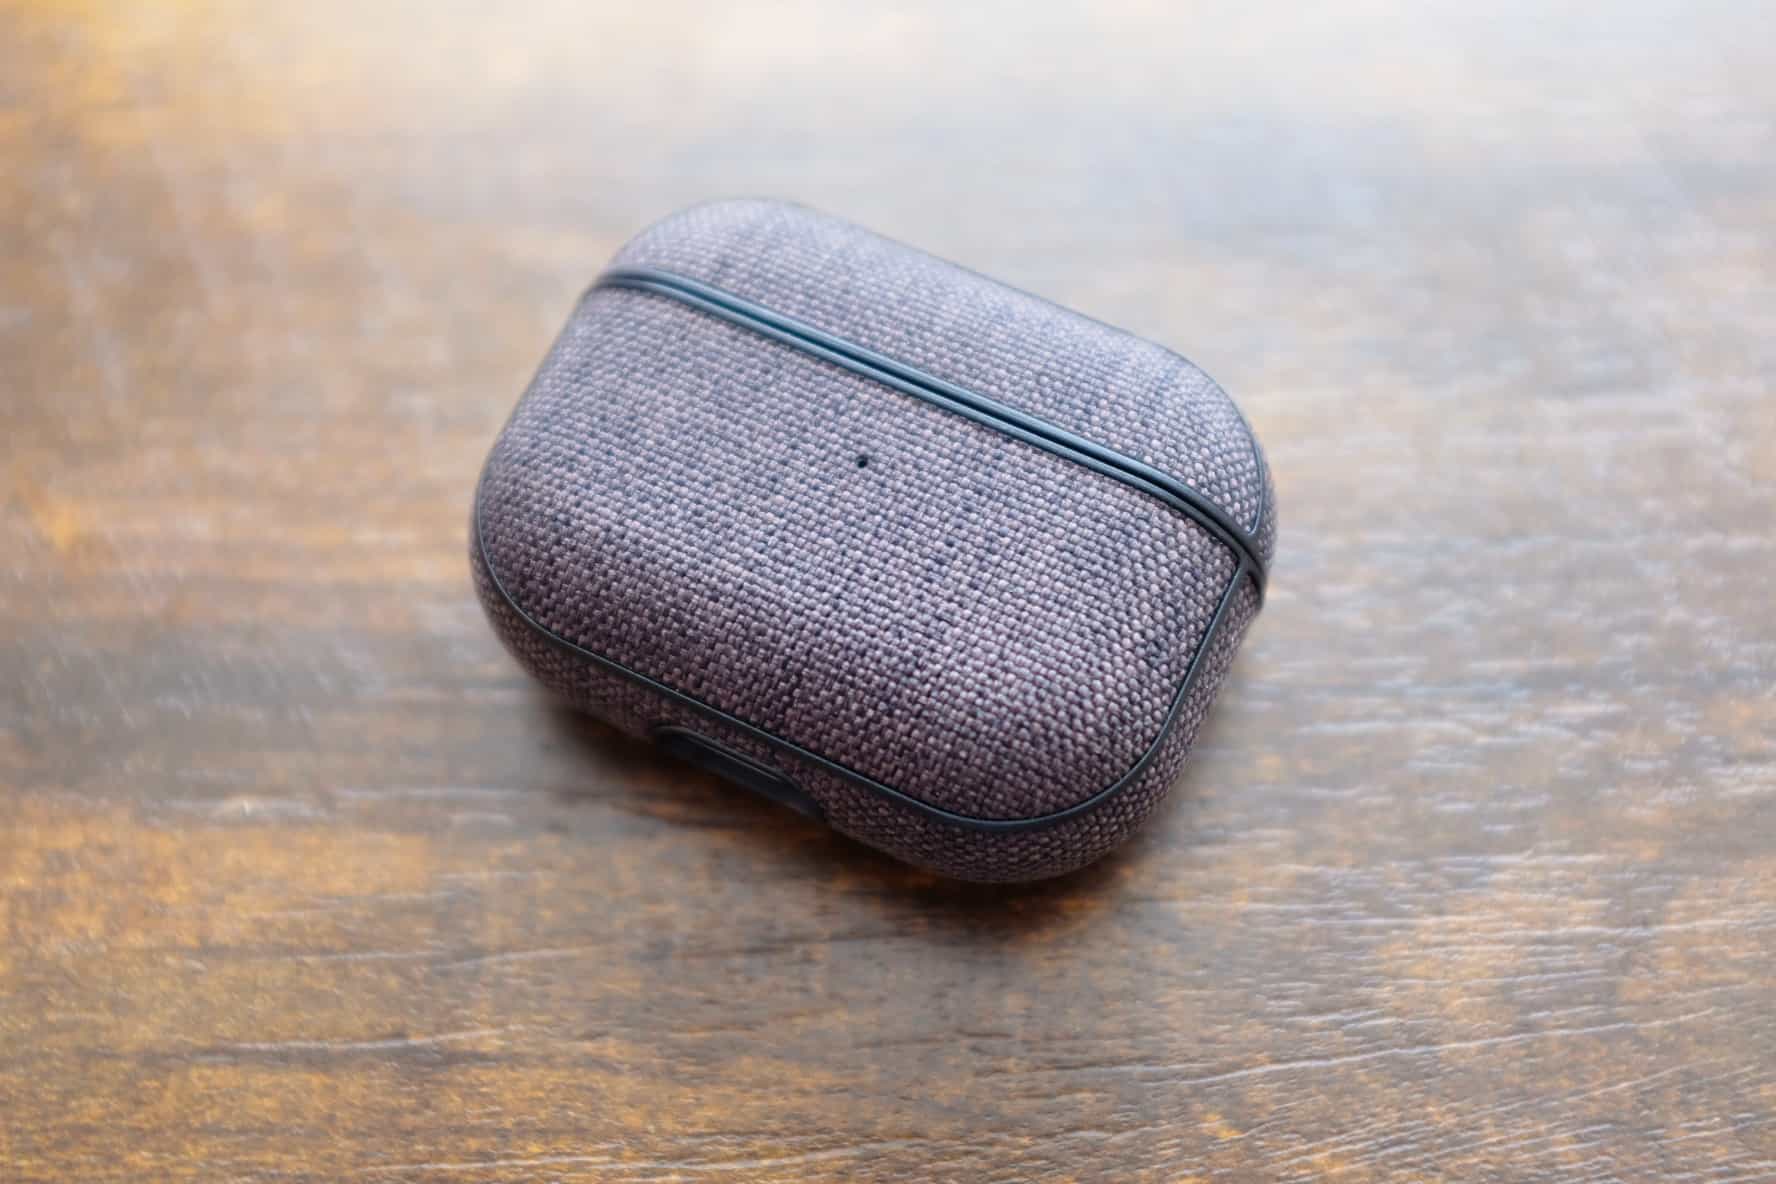 AirPods Pro.Incase AirPods Pro Case with Woolenex